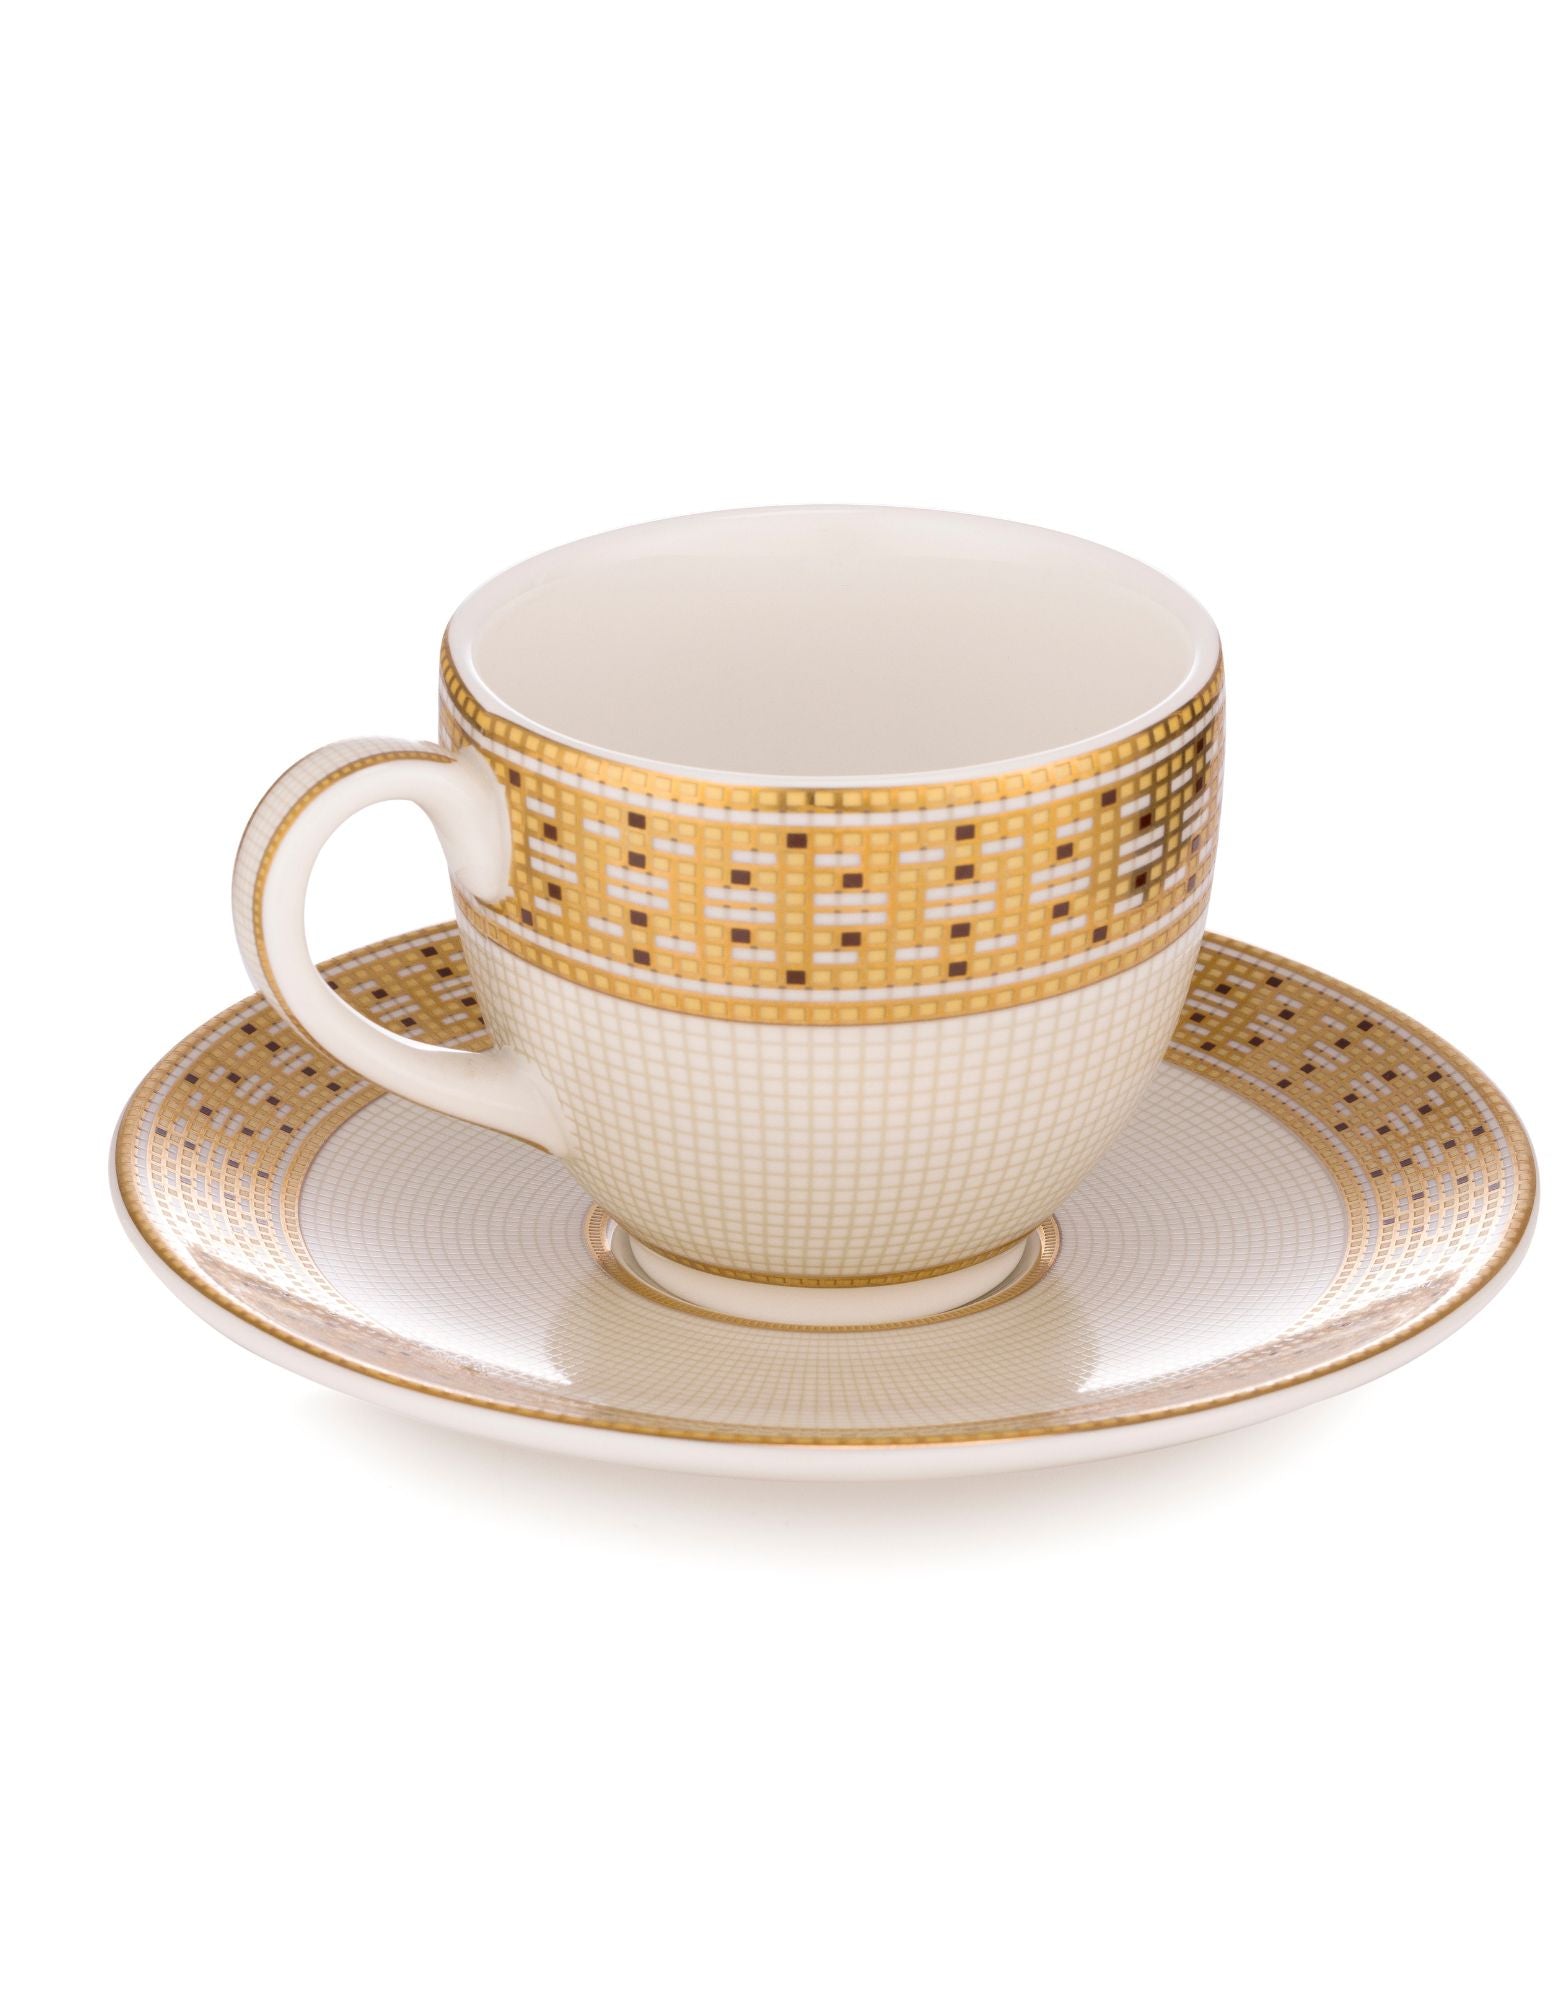 Dru collection's cup and saucer